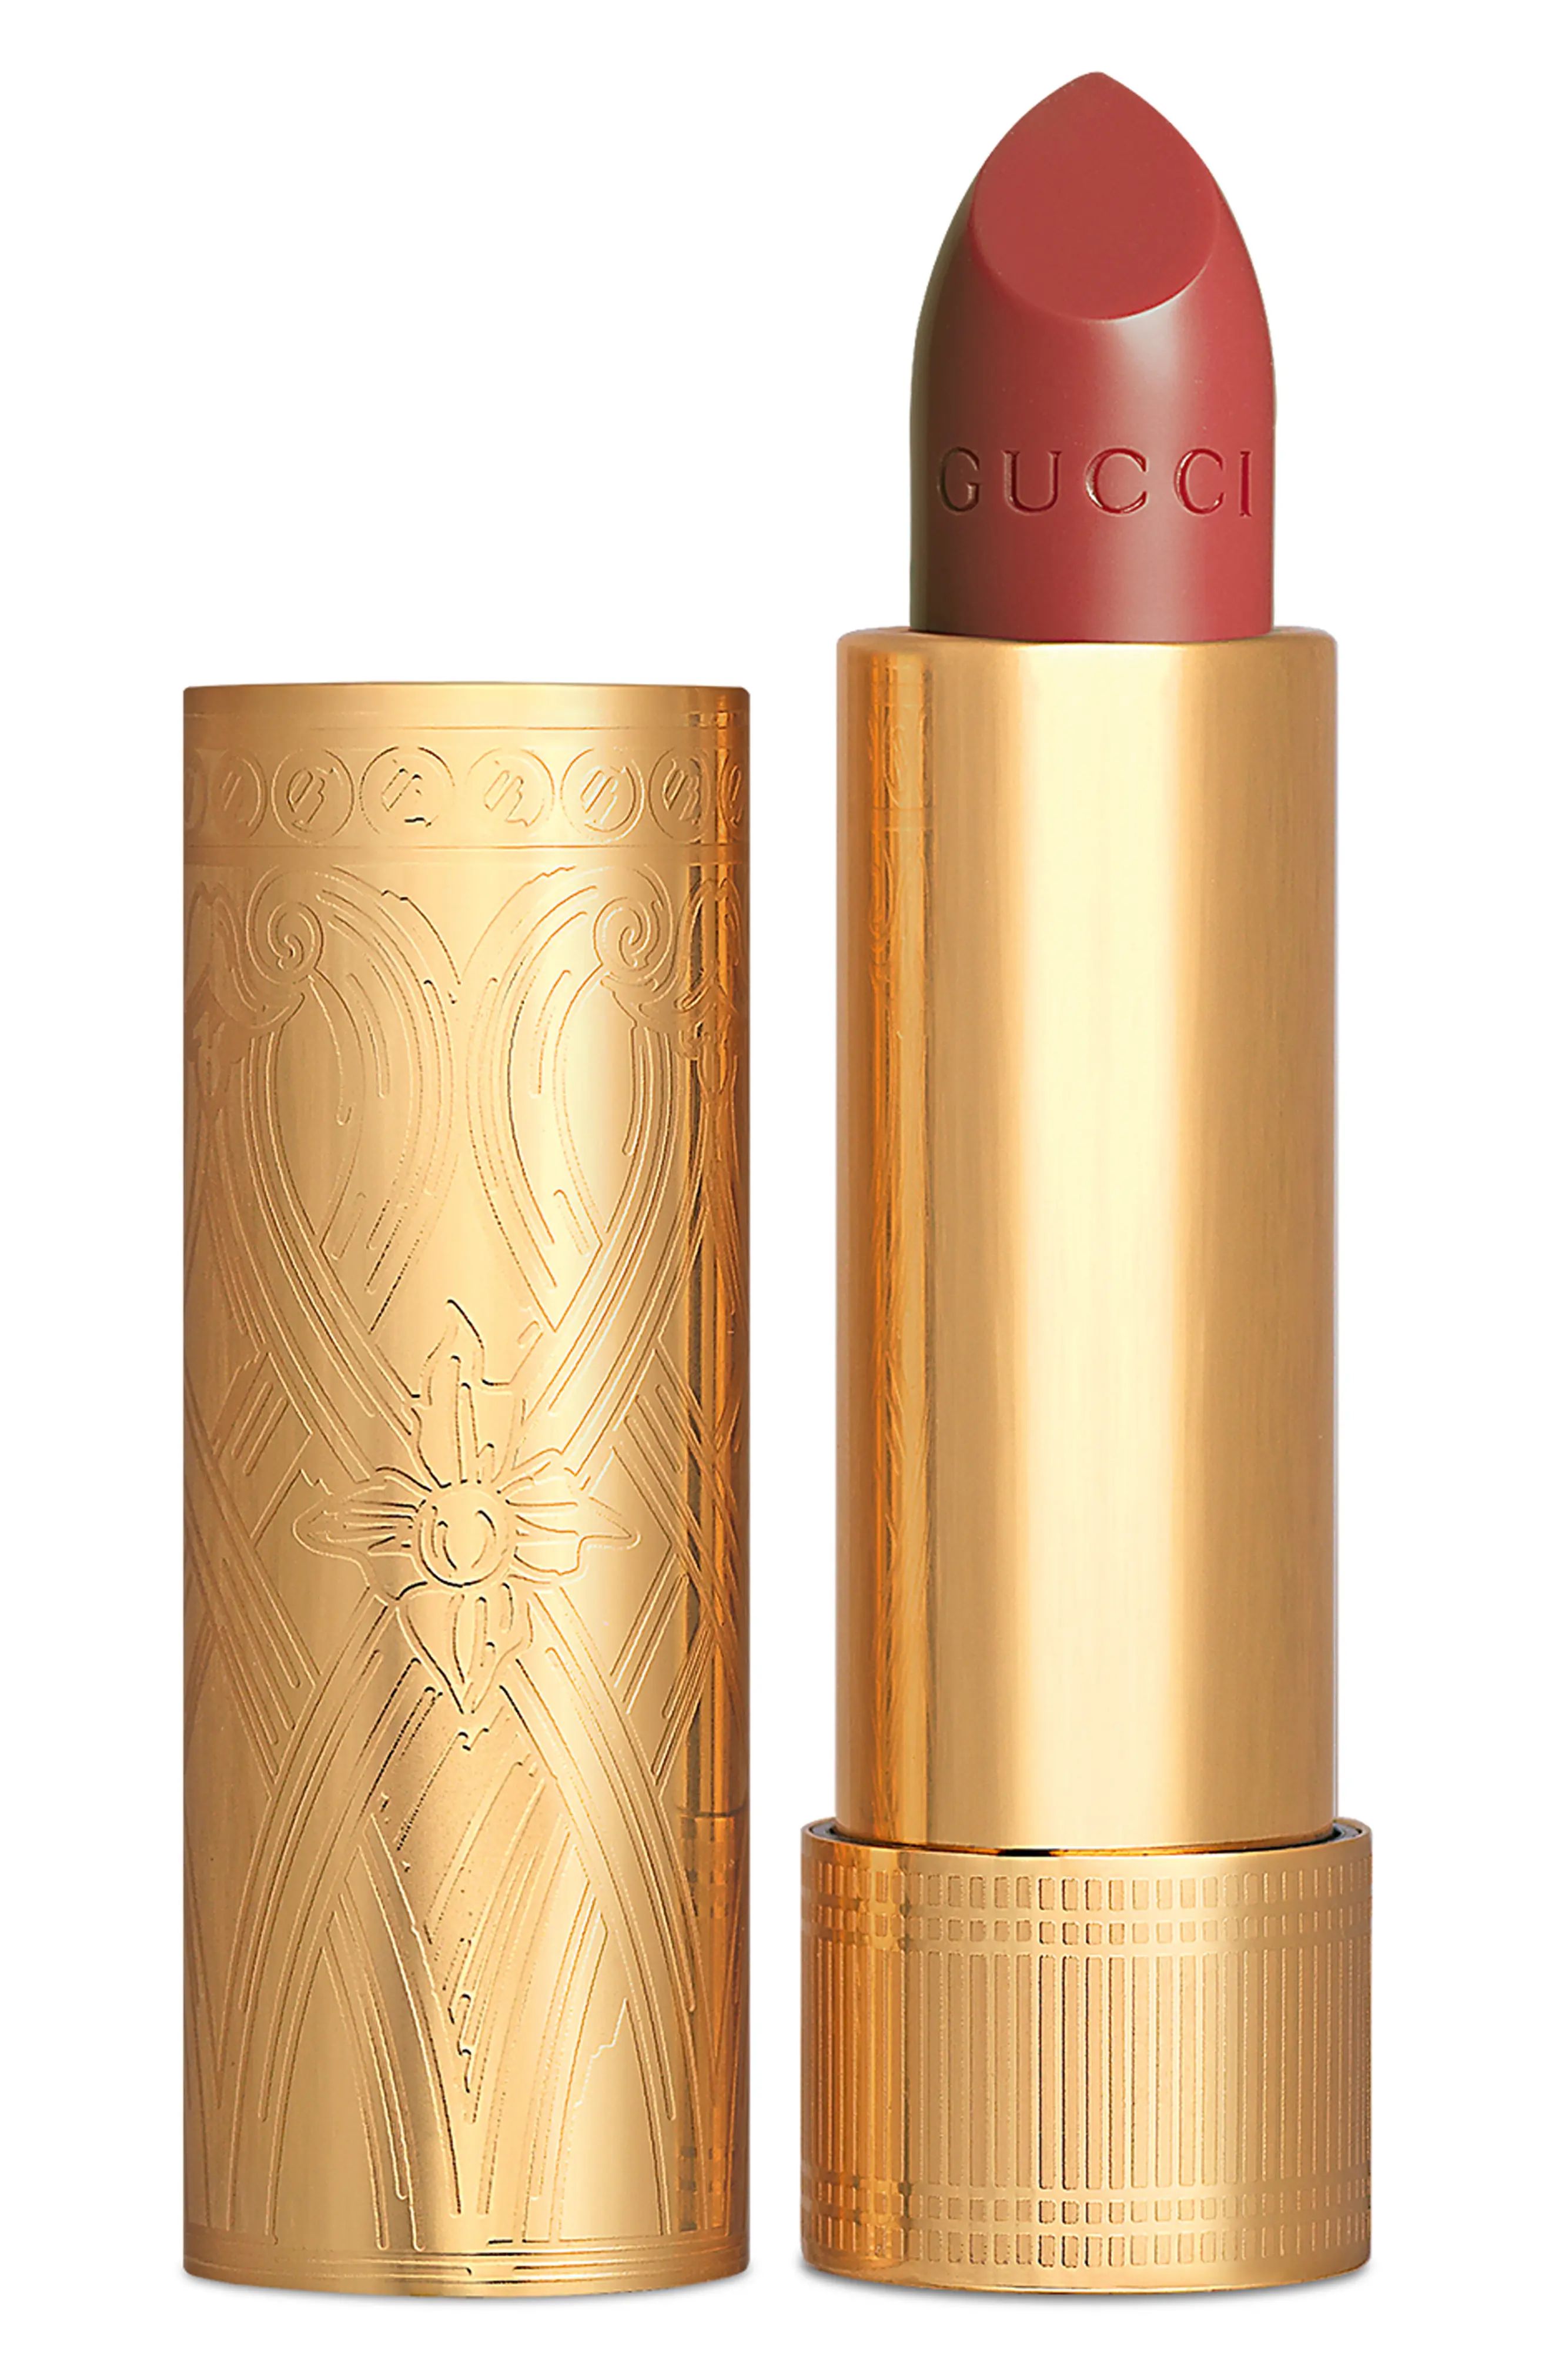 Gucci Rouge a Levres Satin Lipstick in Moira Sienna at Nordstrom | Nordstrom